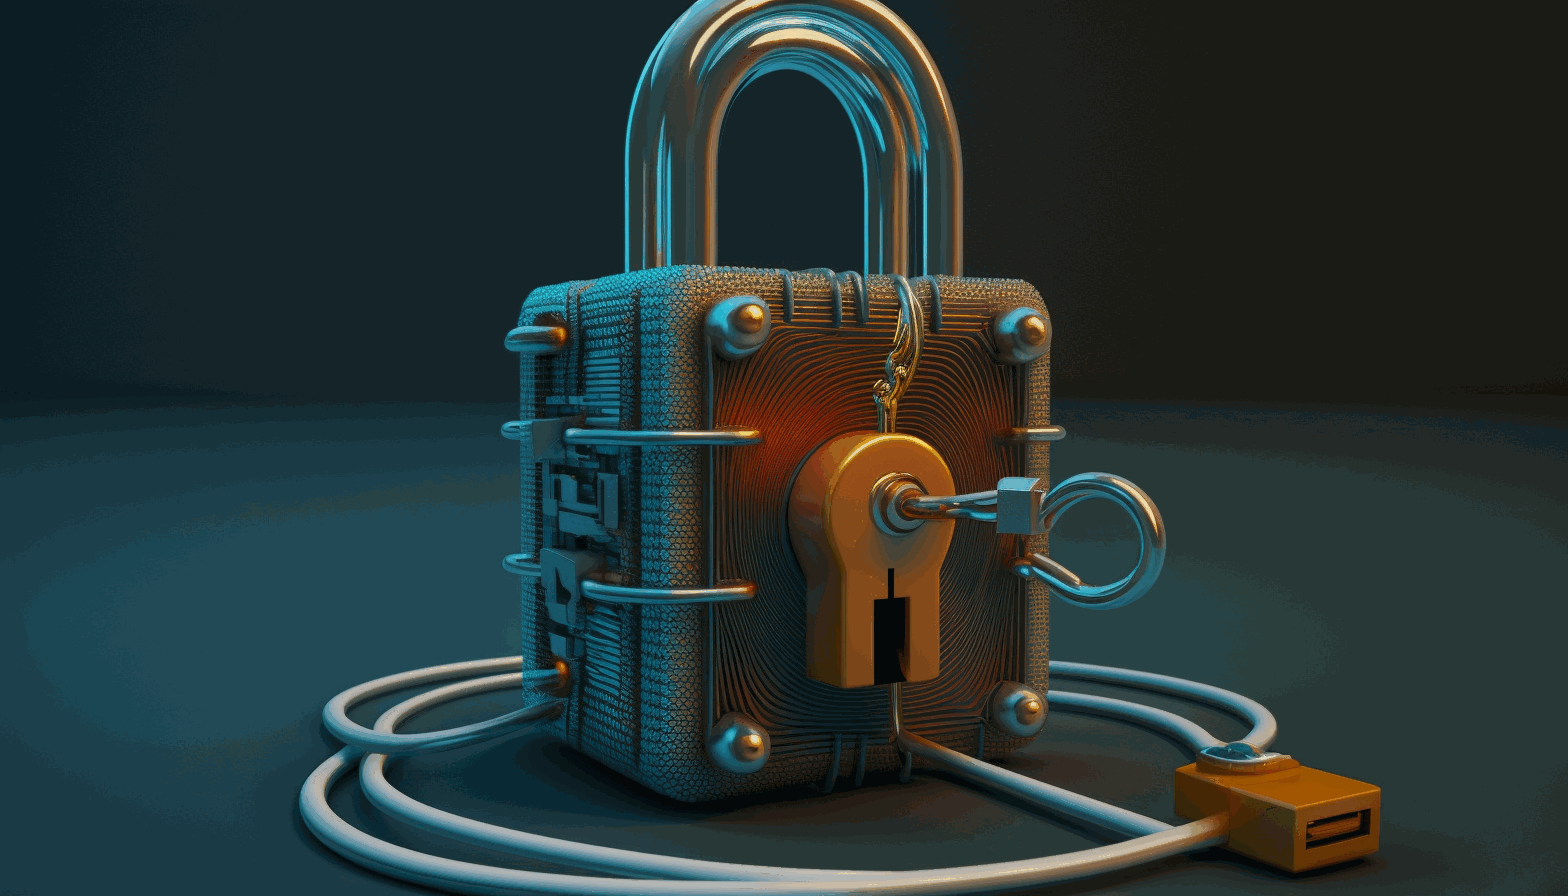 A padlock and a key standing on a network cable in a symbolic way representing Zero Trust Security.